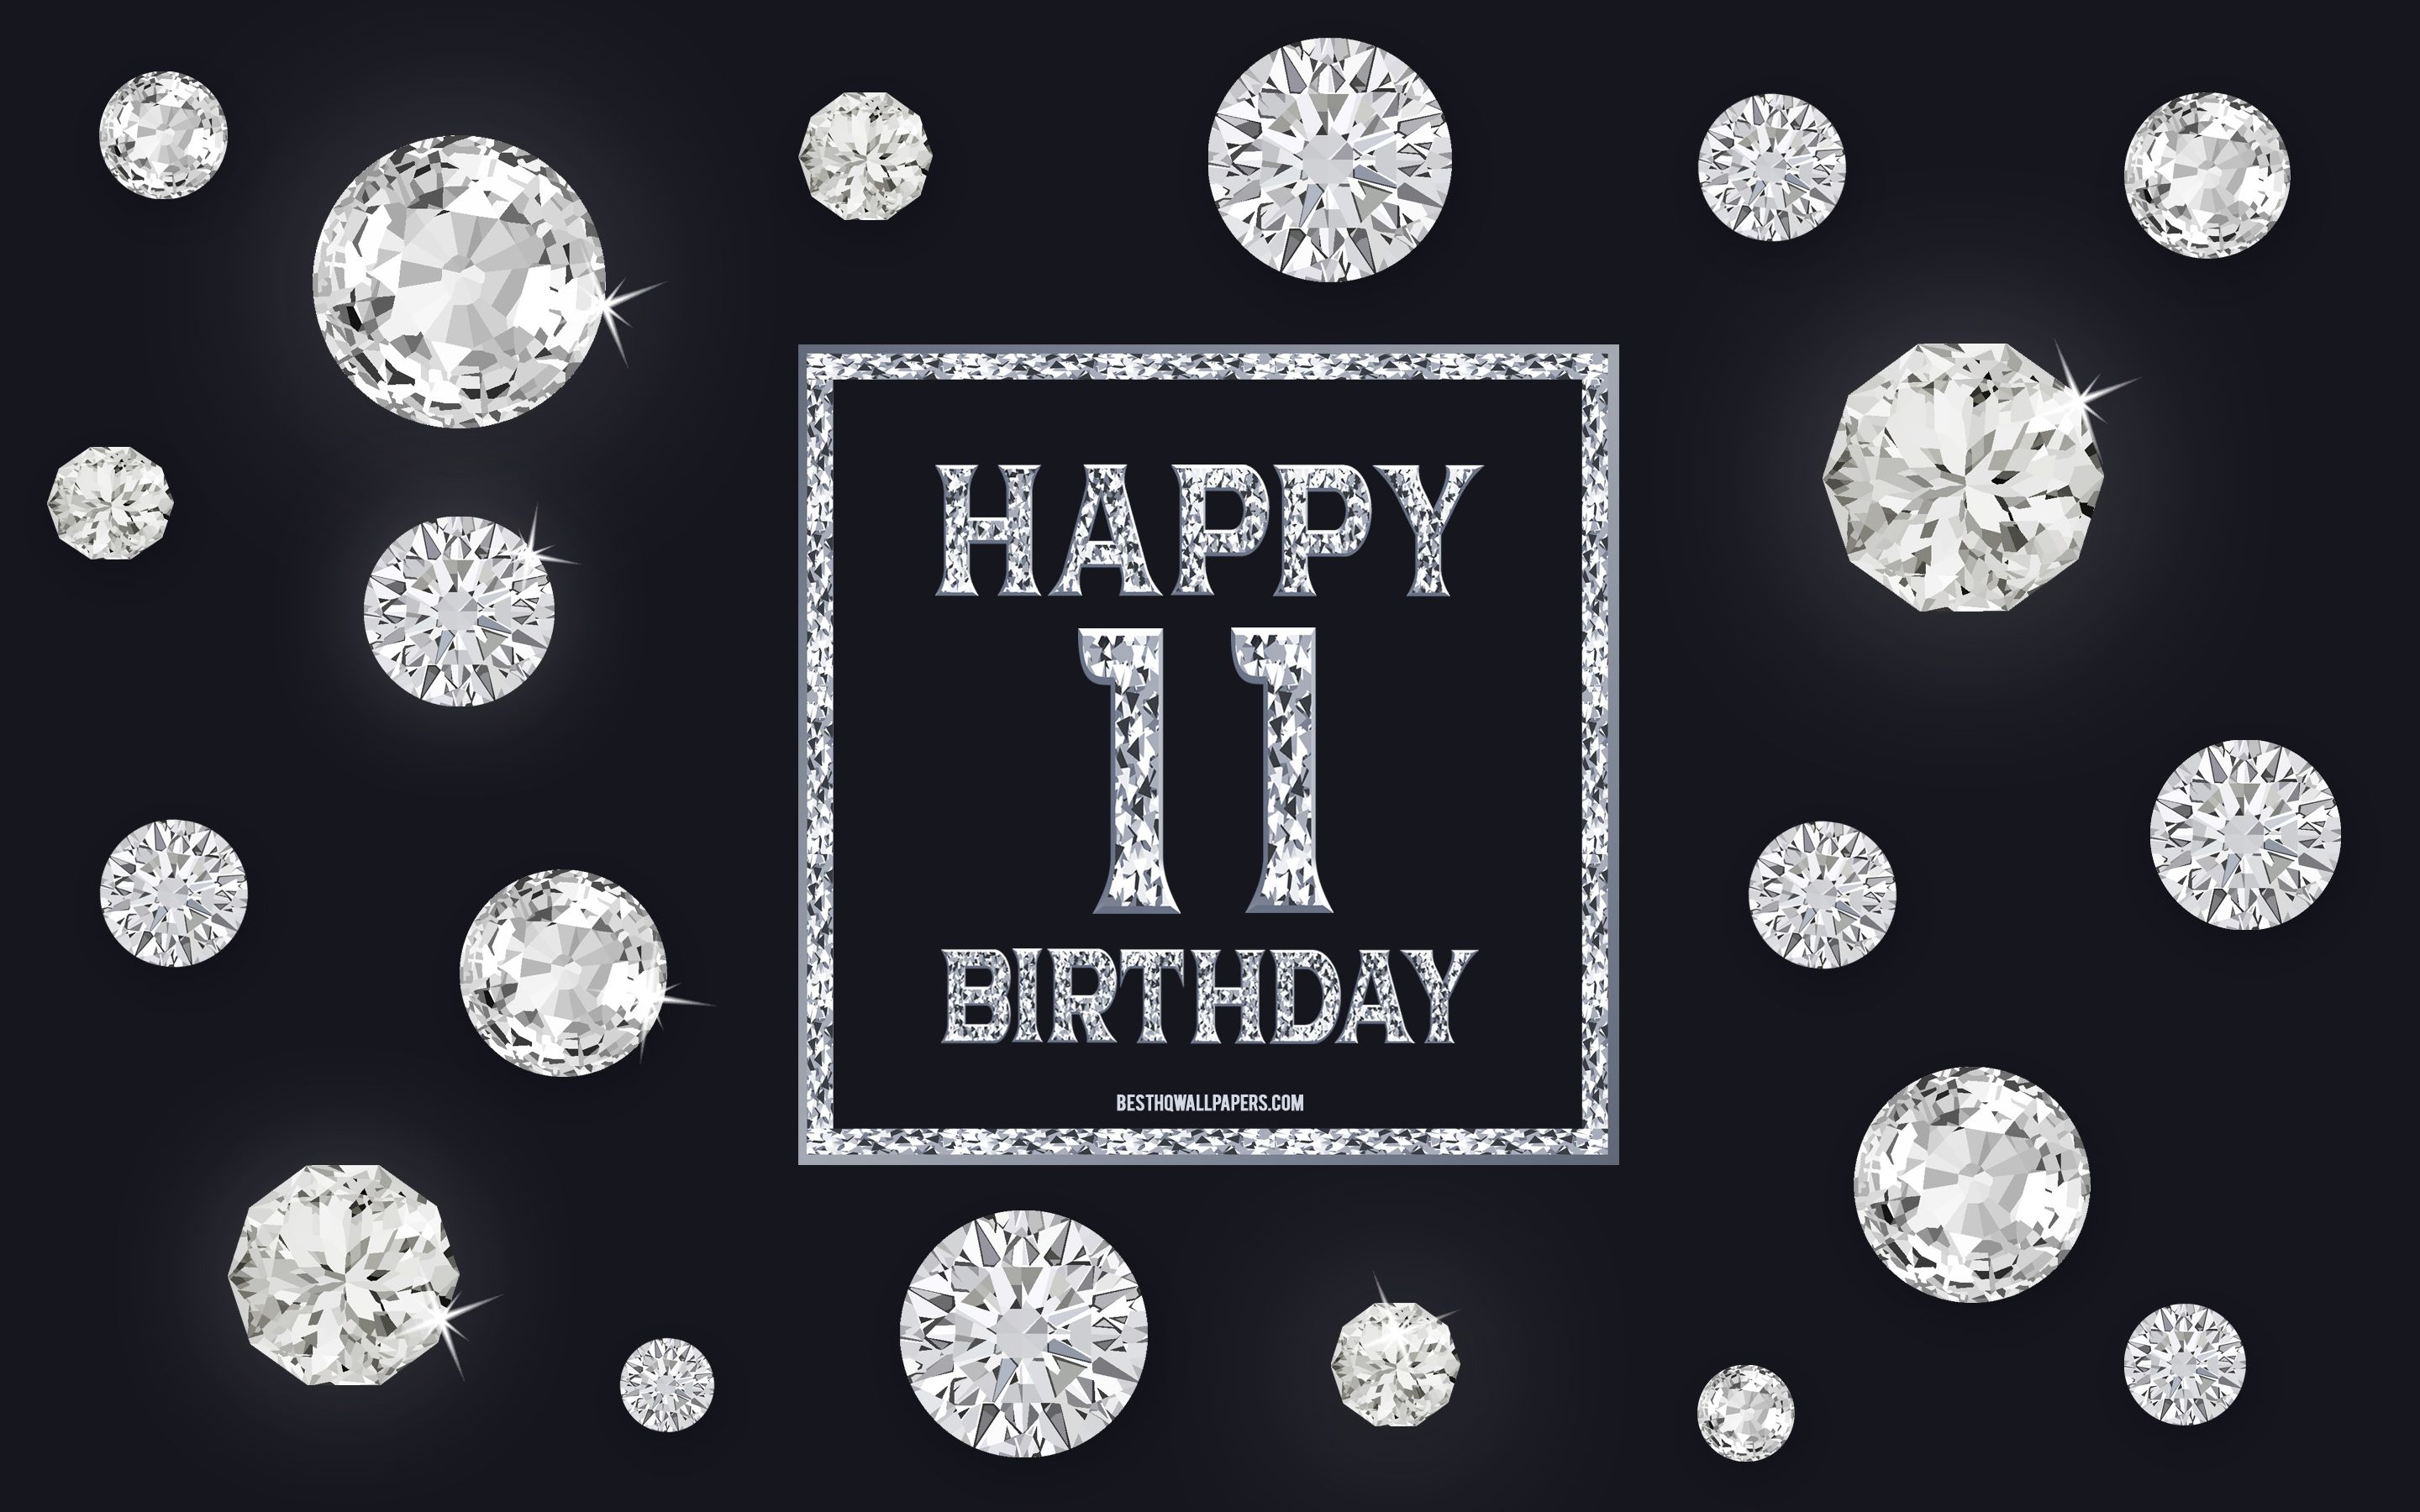 Download wallpaper 11th Happy Birthday, diamonds, gray background, Birthday background with gems, 11 Years Birthday, Happy 11th Birthday, creative art, Happy Birthday background for desktop with resolution 2880x1800. High Quality HD picture